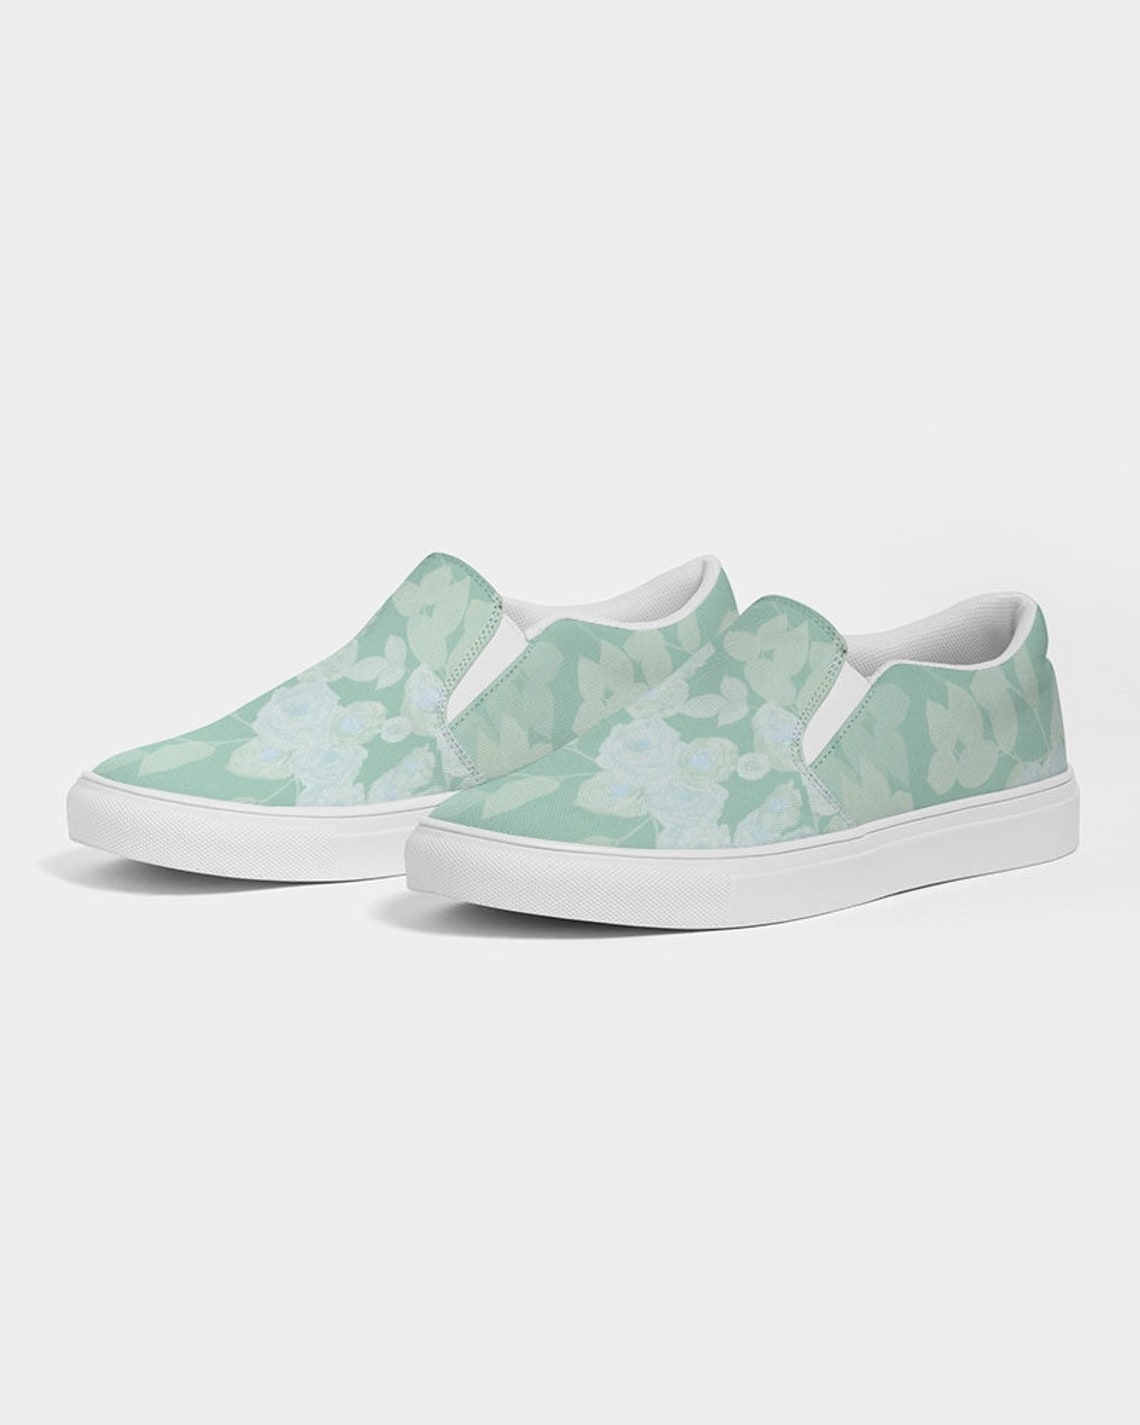 Mint Green Roses Women's Slip-on Canvas Shoe Floral - Etsy